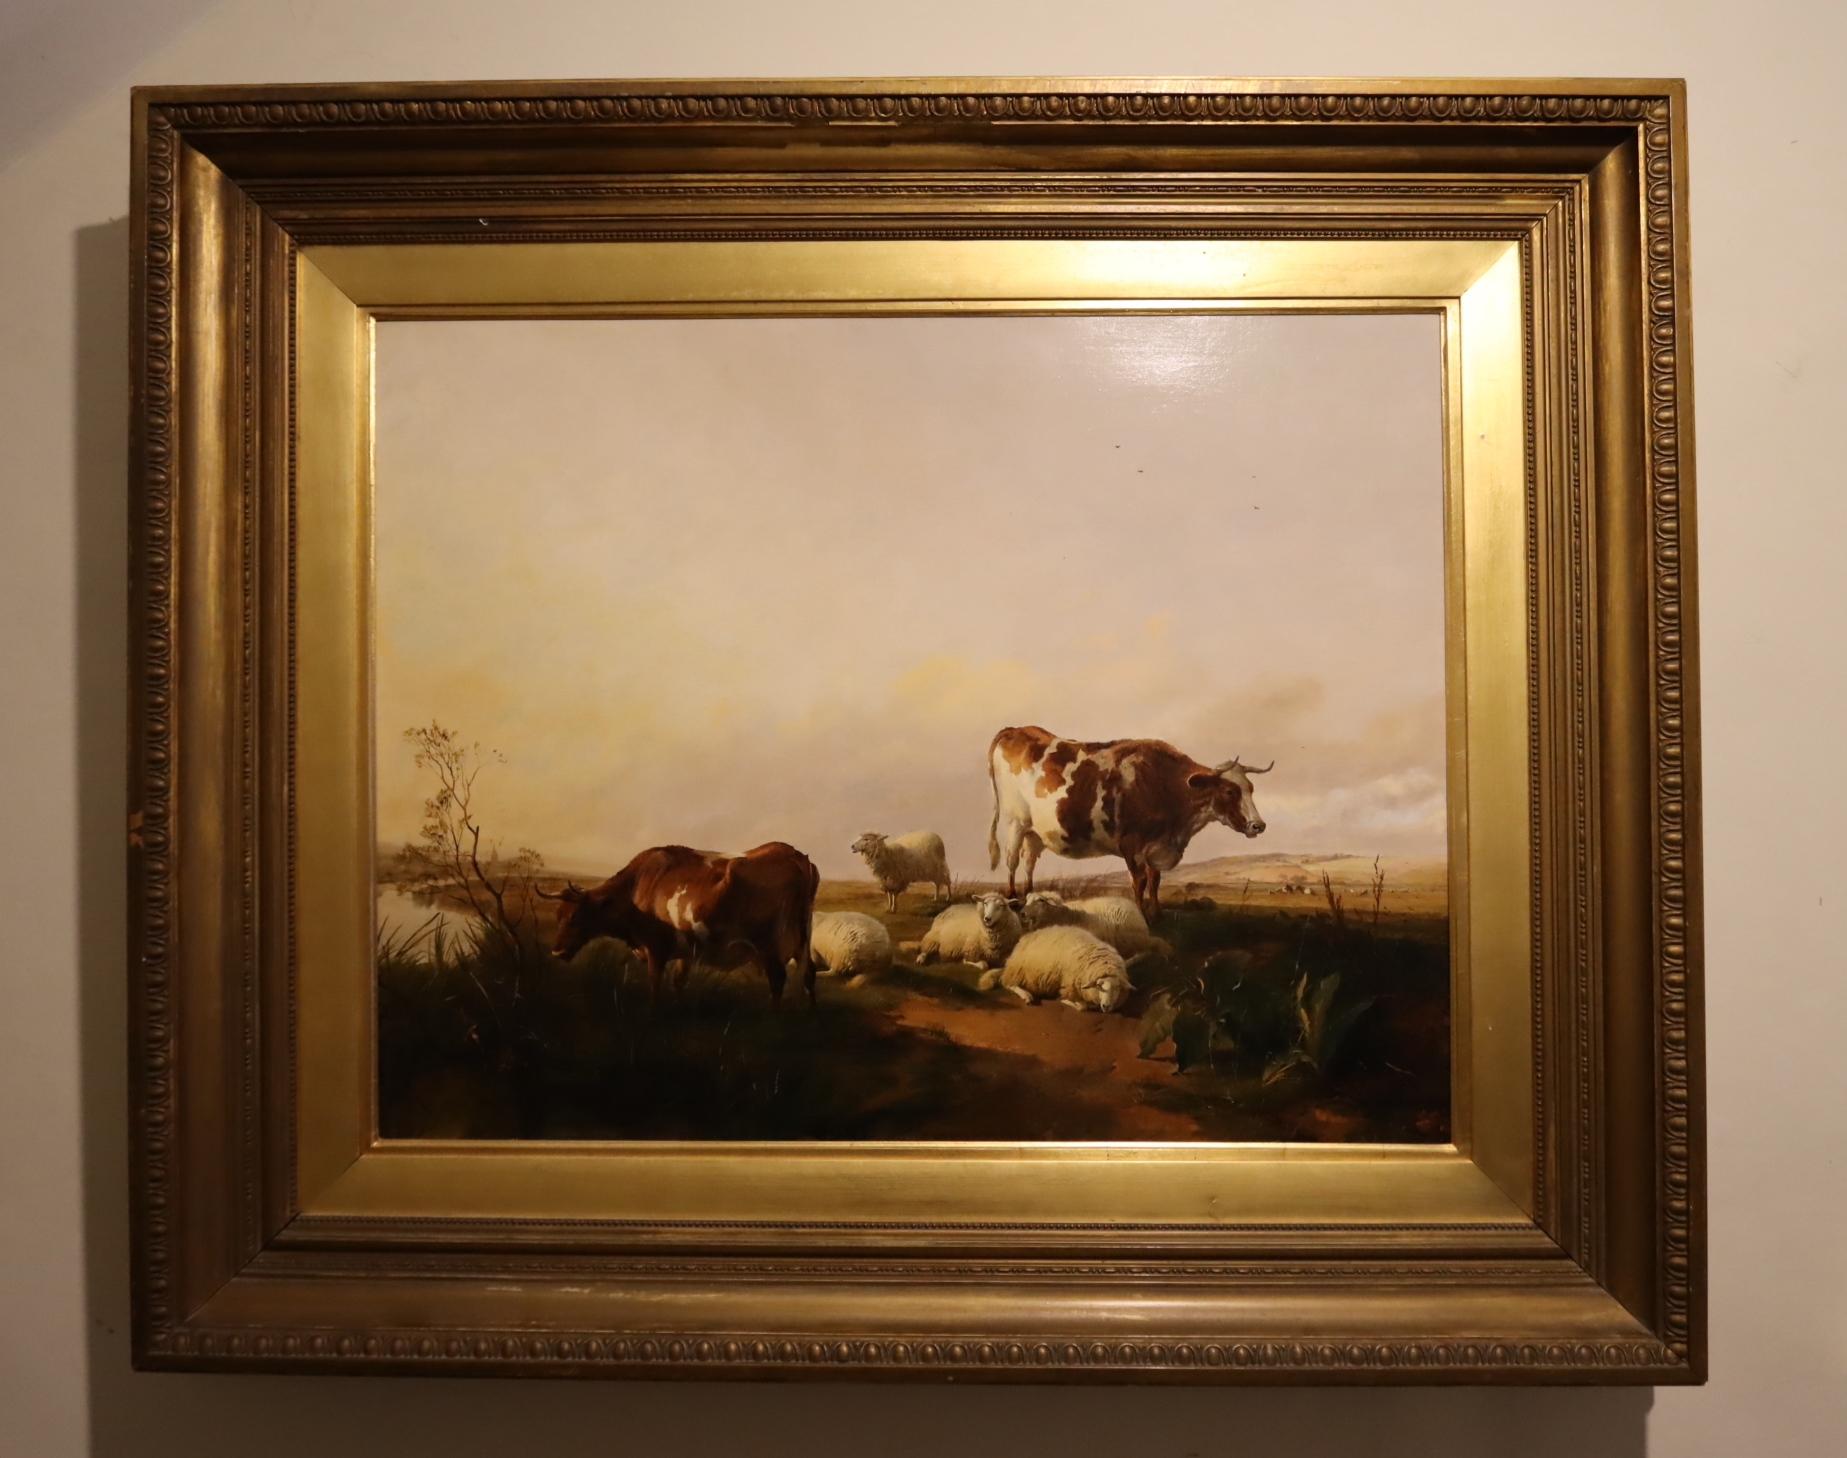 Mid Period Thomas Sidney Cooper, Landscape with Cows & Sheep by a river.
Signed & Dated bottom middle 1865.
Canvas 34 1/2 x 26 1/2 inches.
Framed 48 x 40 inches.
Oil on Canvas.

This is s wonderful painting by Thomas Sidney Cooper and of a brilliant